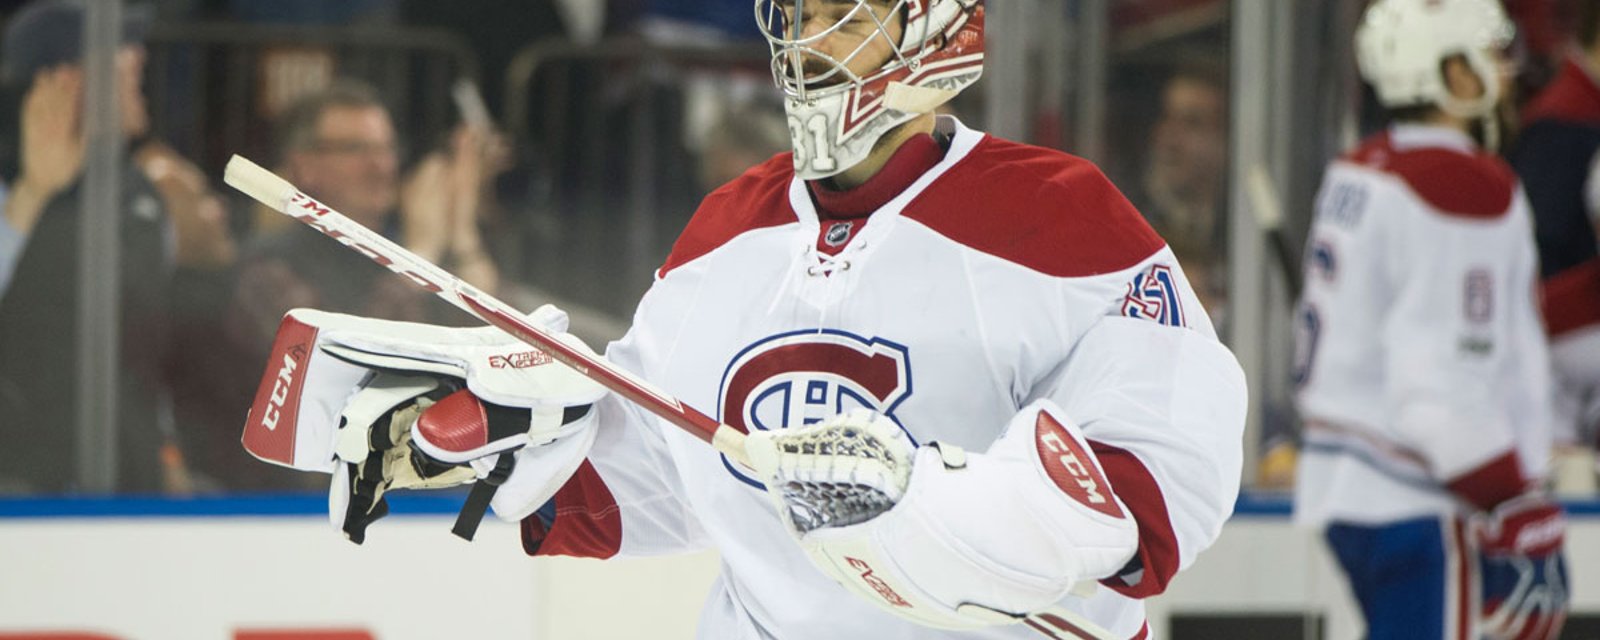 What is going on with Carey Price?